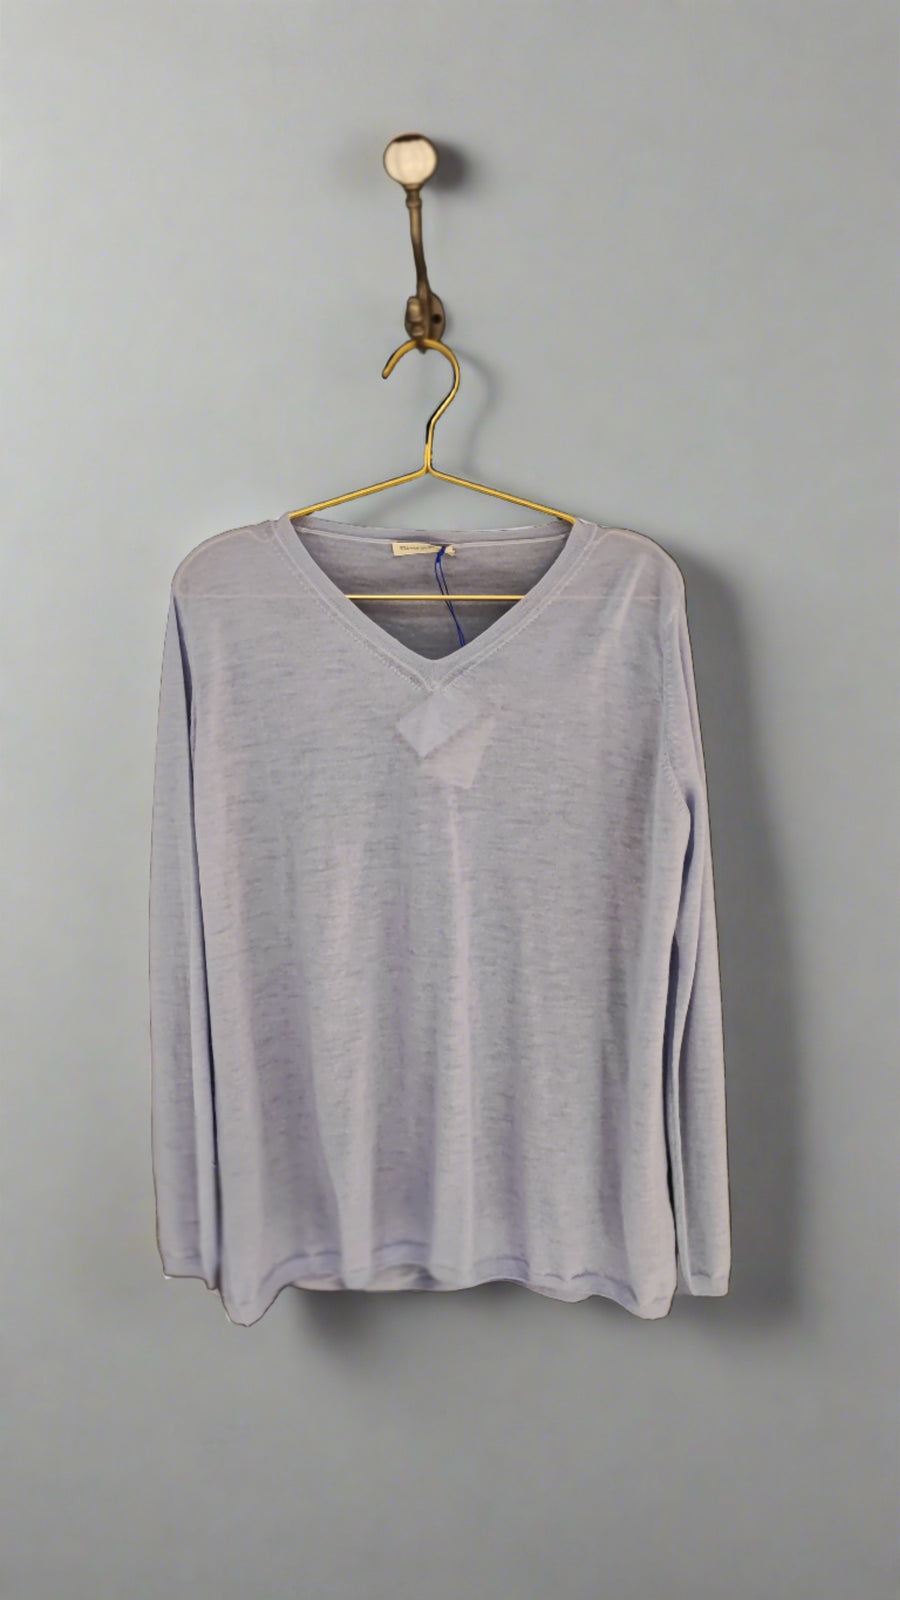 MIRROR IN THE SKY FINE KNIT CASHMERE SWEATER V-NECK THERMAL